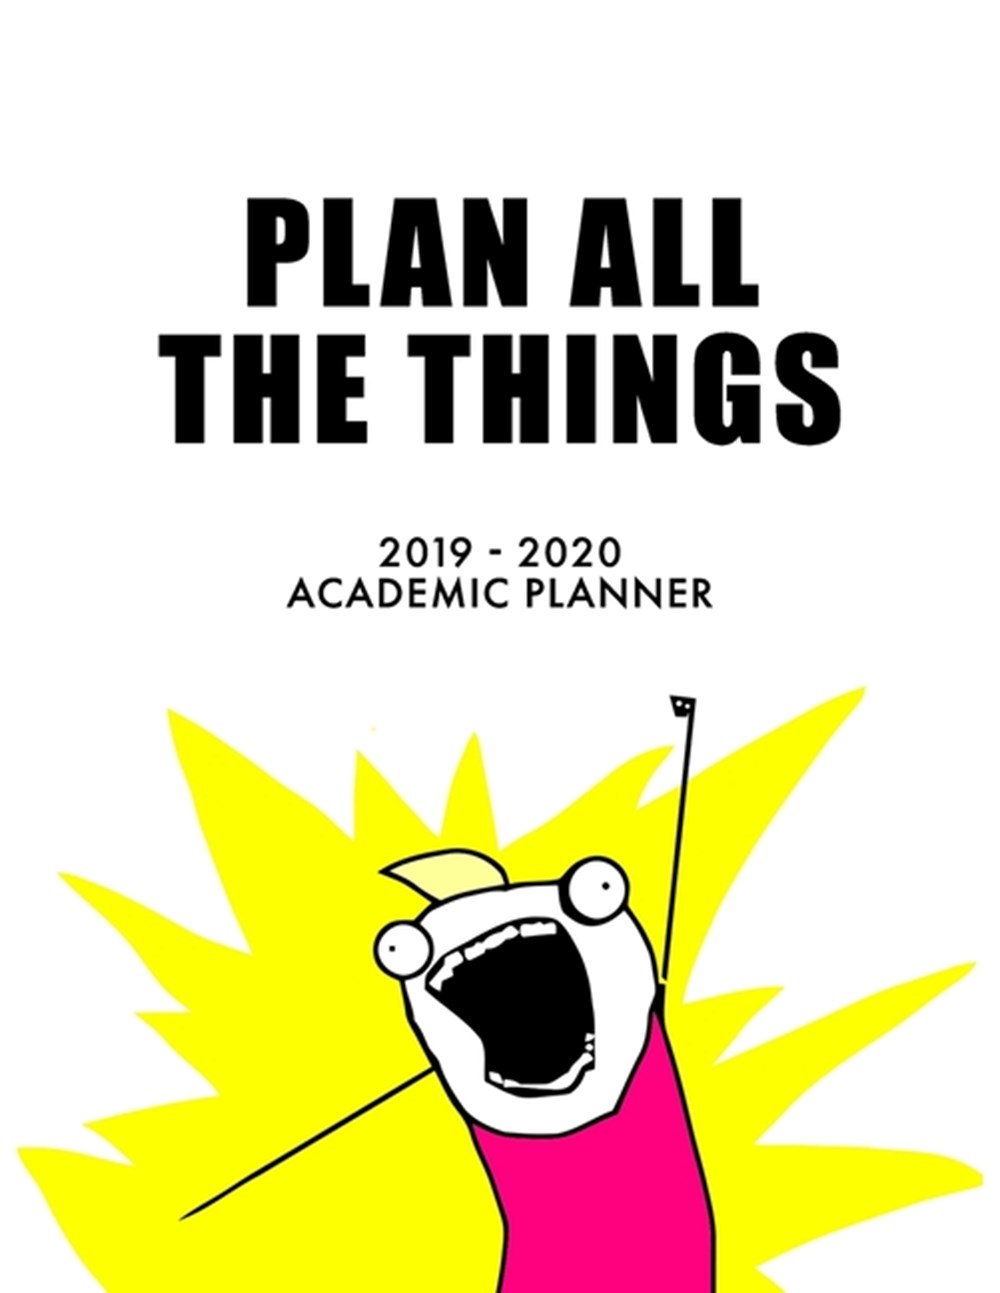 Academic Planner 2019-2020 Academic Year July 2019 - June 2020, 7 Subject Weekly Student Planner + M